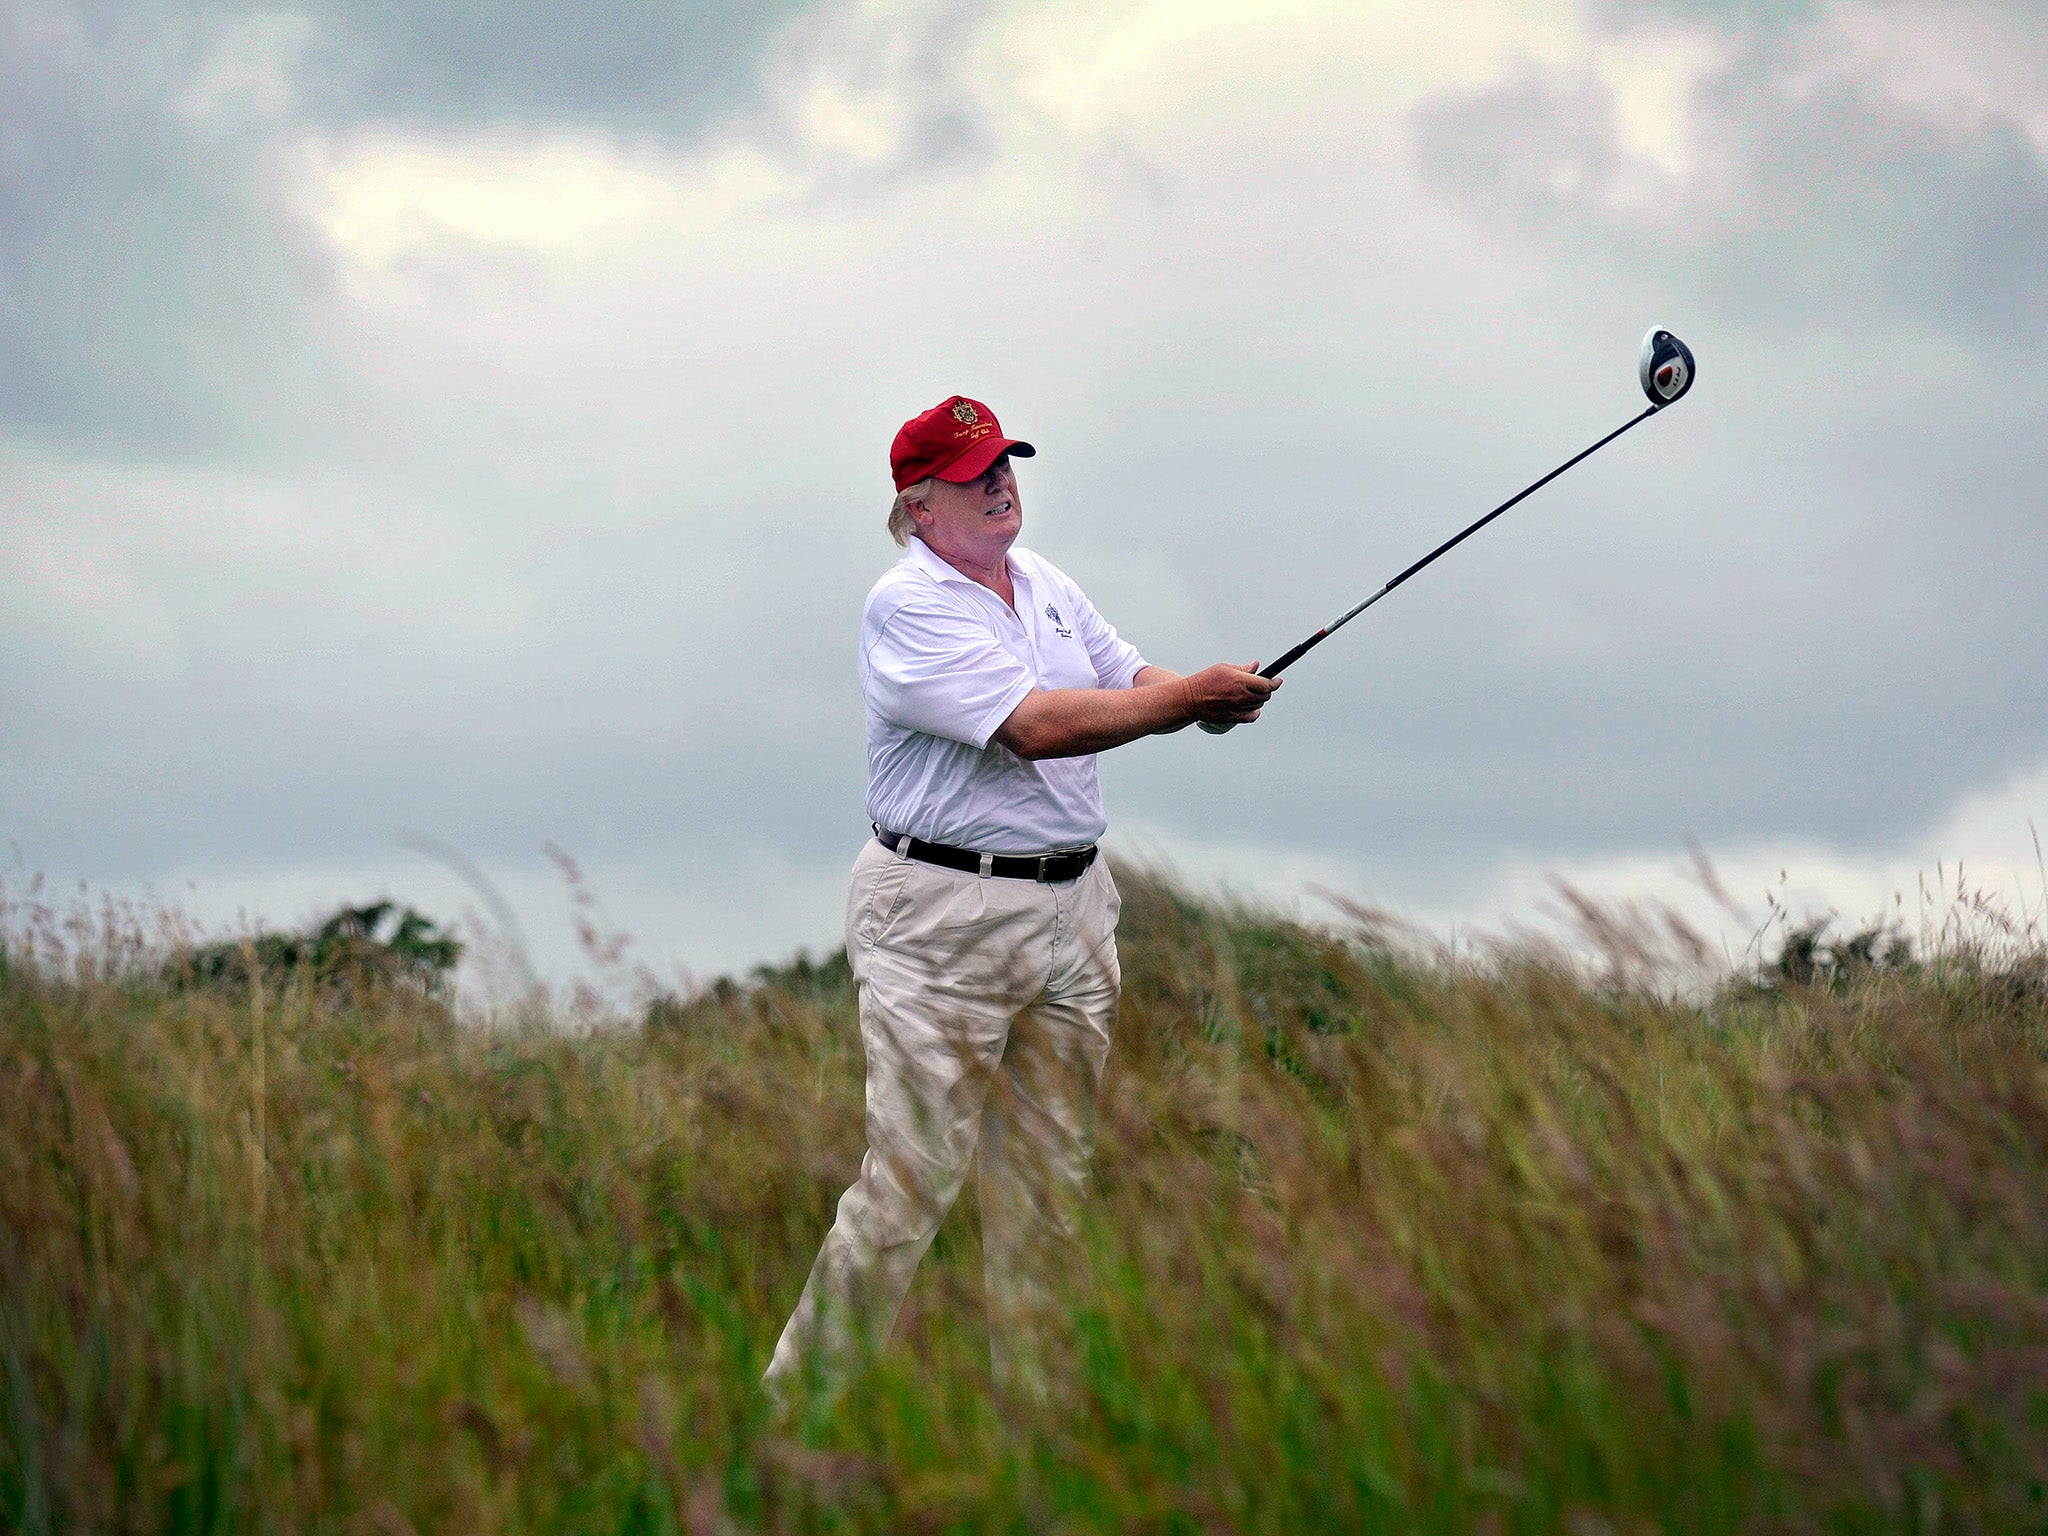 Donald Trump was back on the golf course on Friday for the 18th time since his inauguration